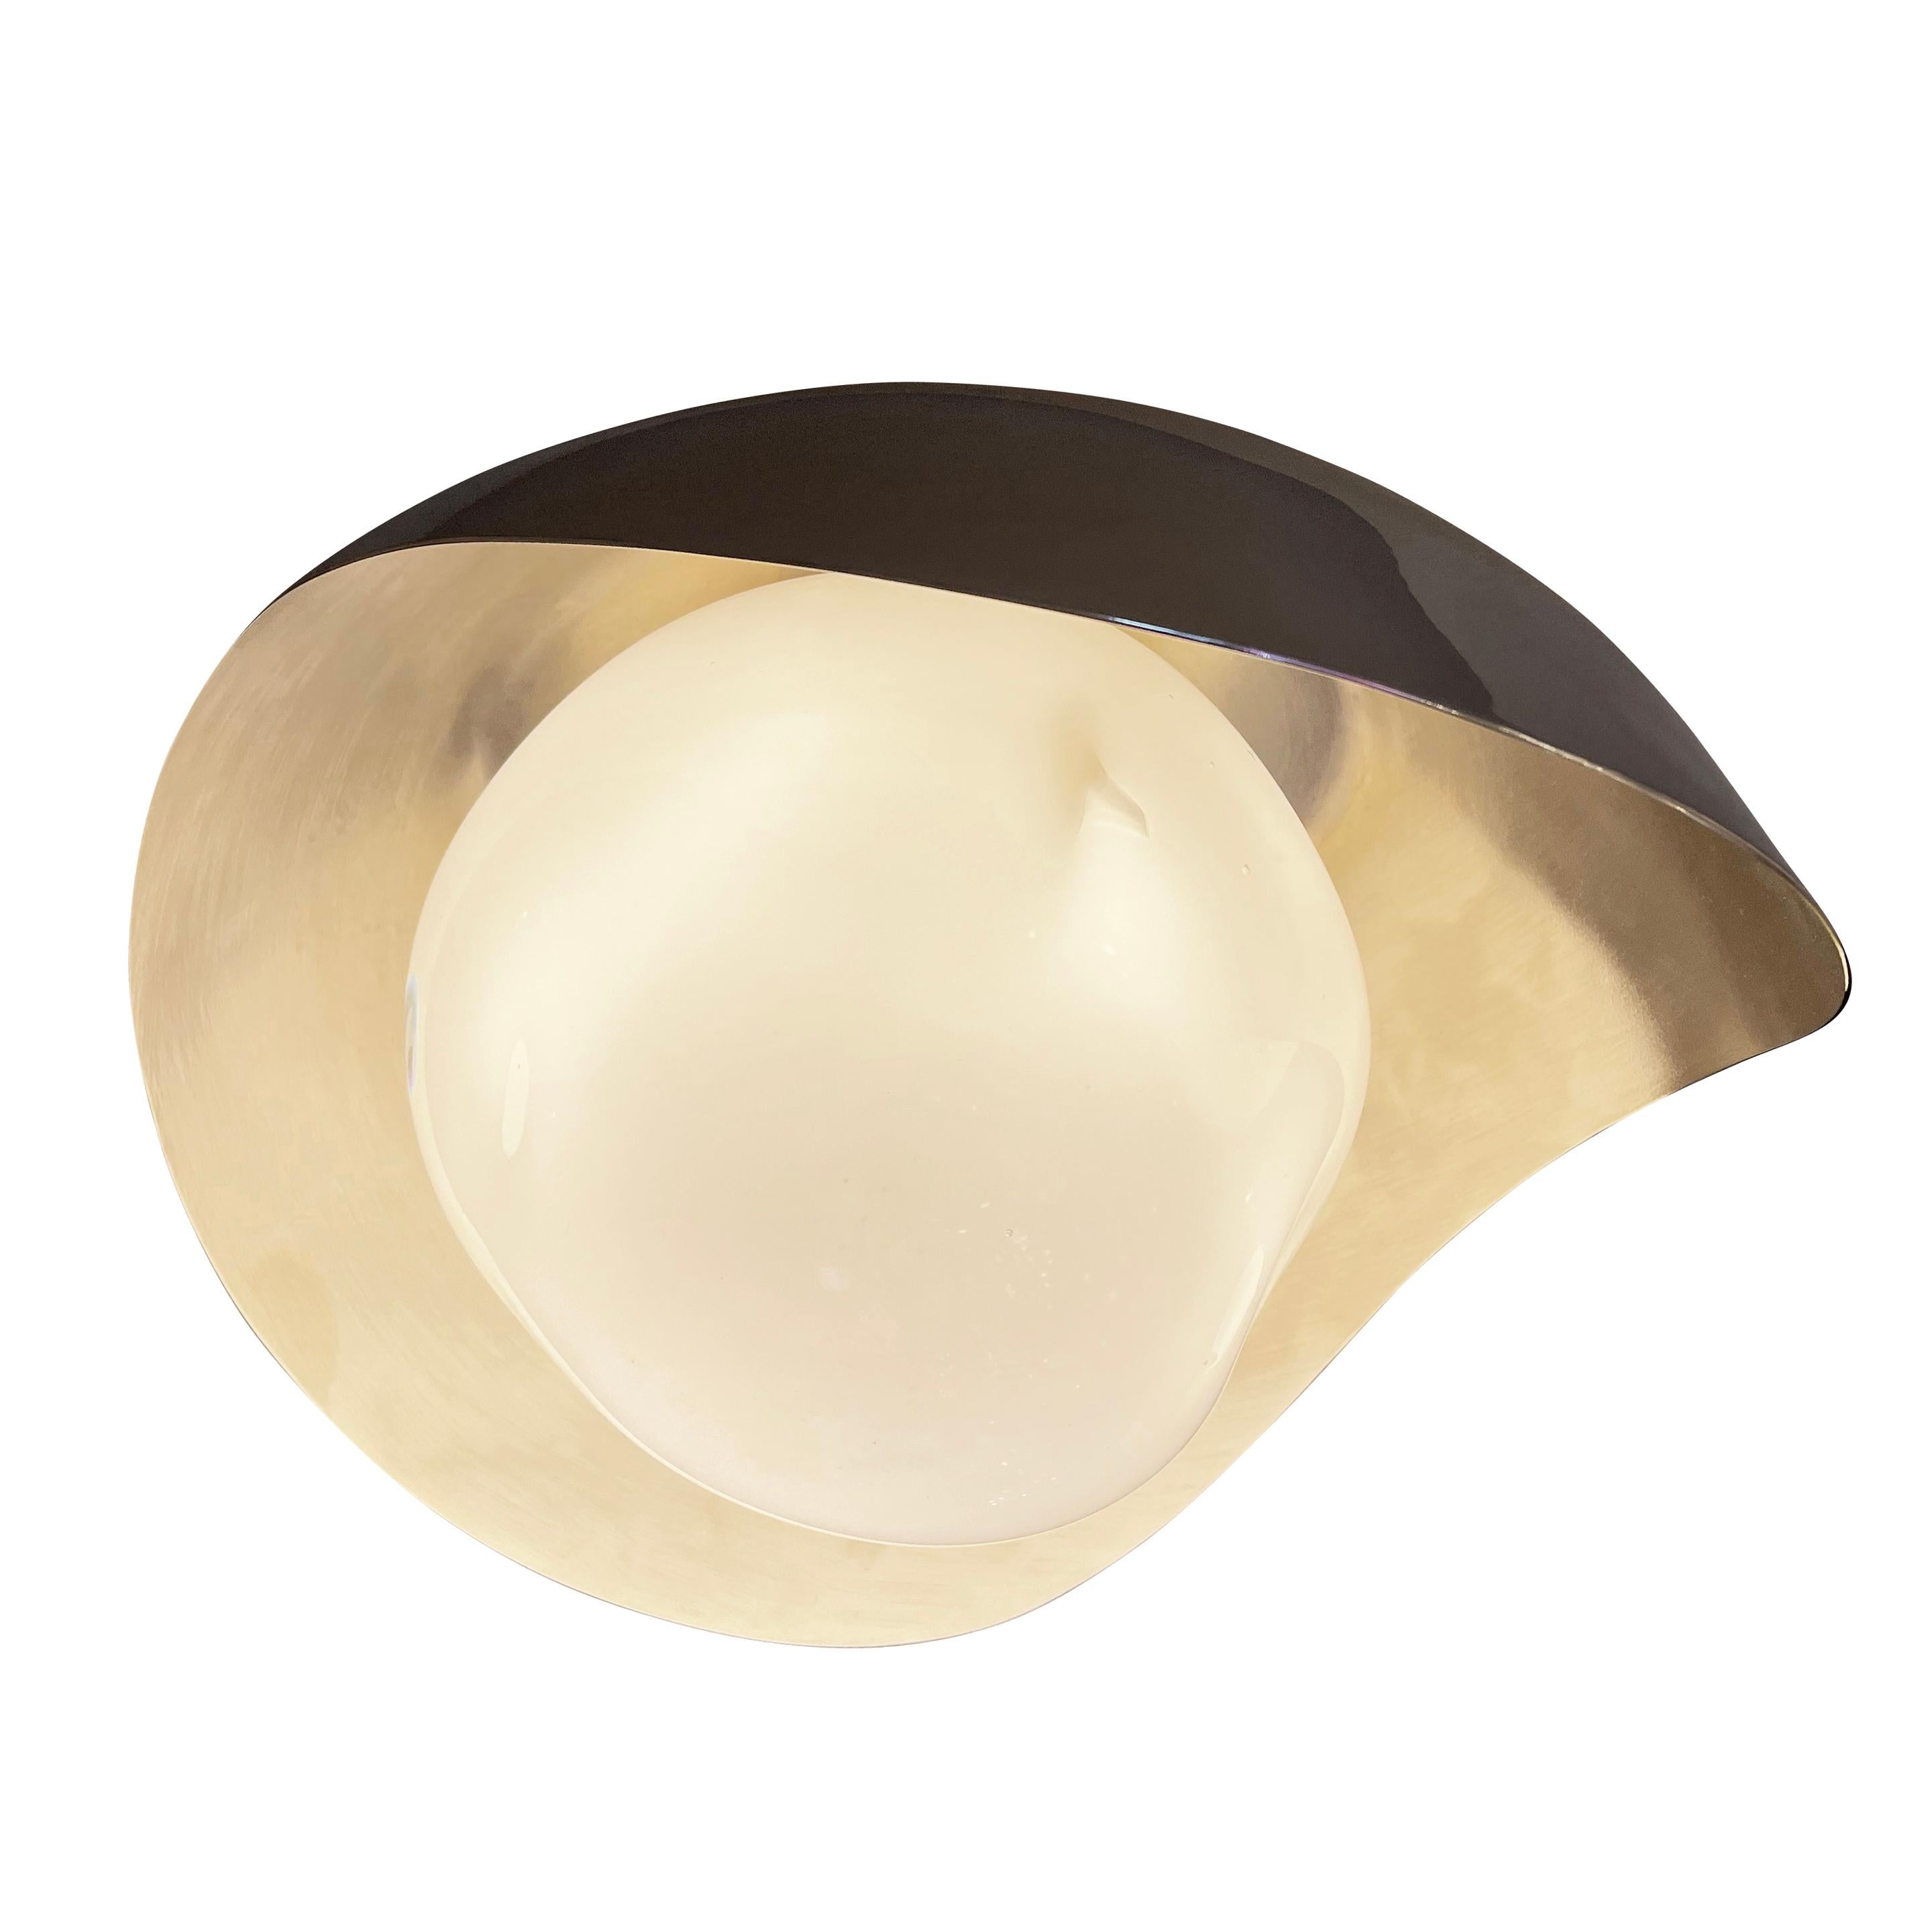 The Perla flush mount features an organic brass shell nestling our sfera glass handblown in Tuscany. Shown in a two-tone finish with a polished nickel exterior and satin nickel interior. Can also be installed as a wall light.

Customization options: